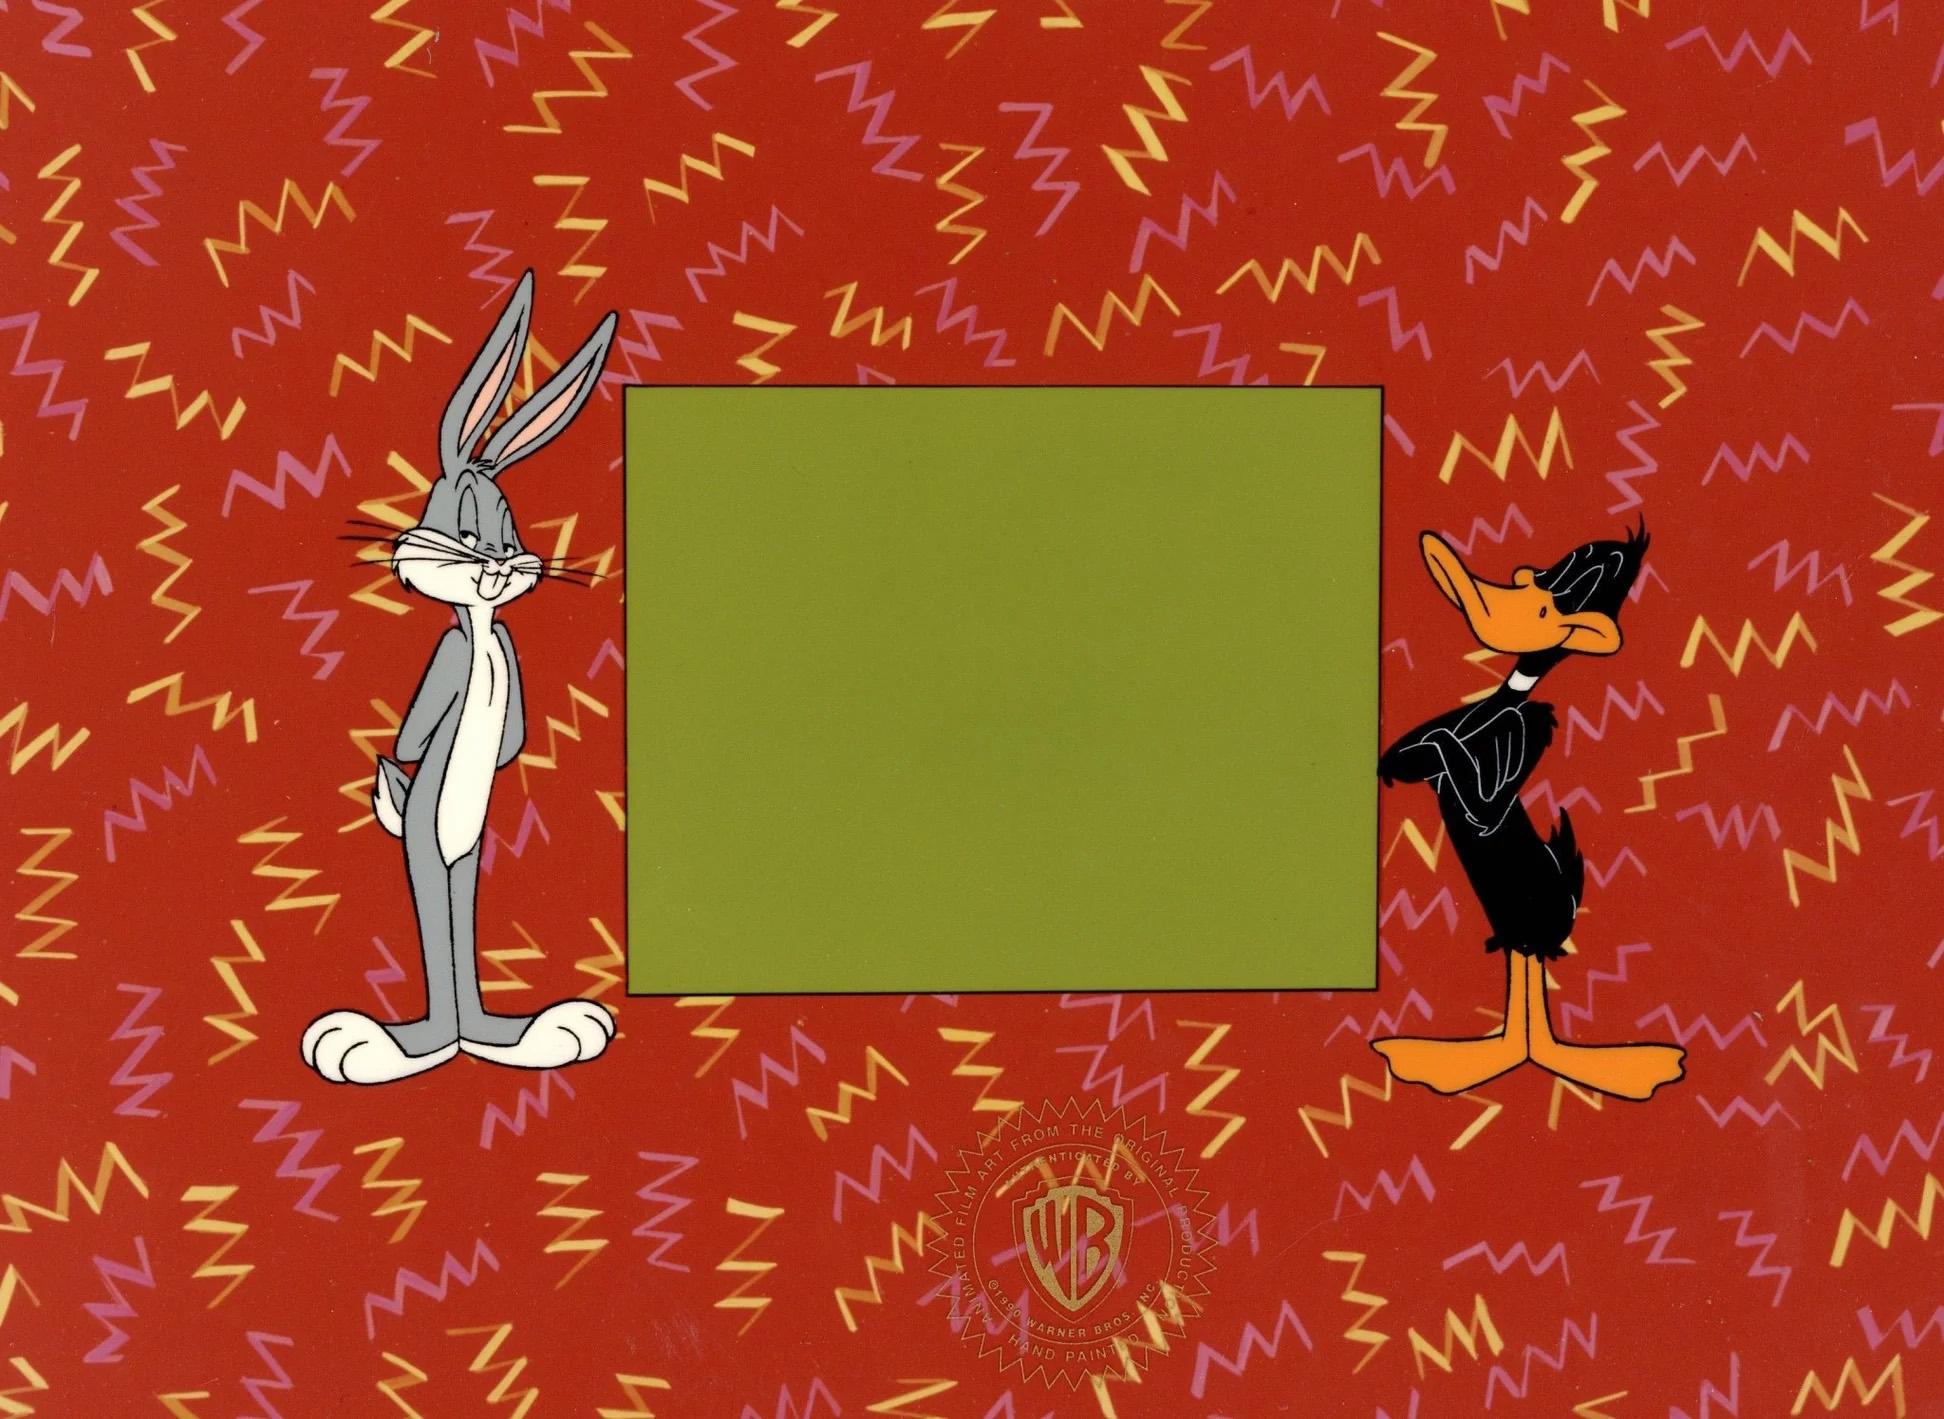 Looney Tunes Original Production Cel: Bugs Bunny and Daffy Duck - Art by Looney Tunes Studio Artists